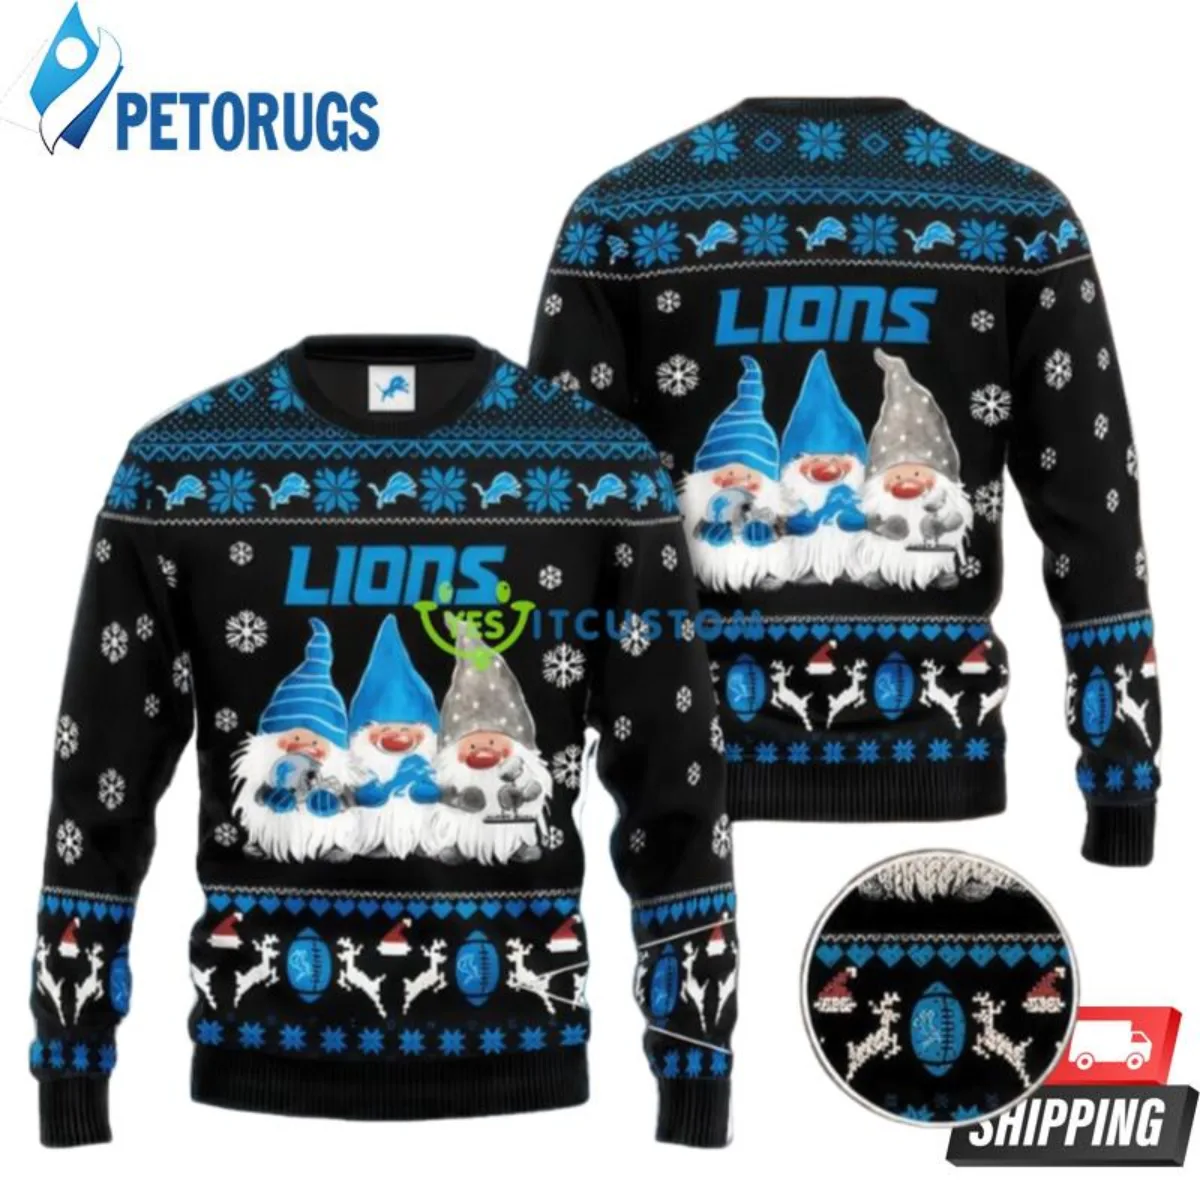 Ugly Christmas sweaters: Detroit sports edition